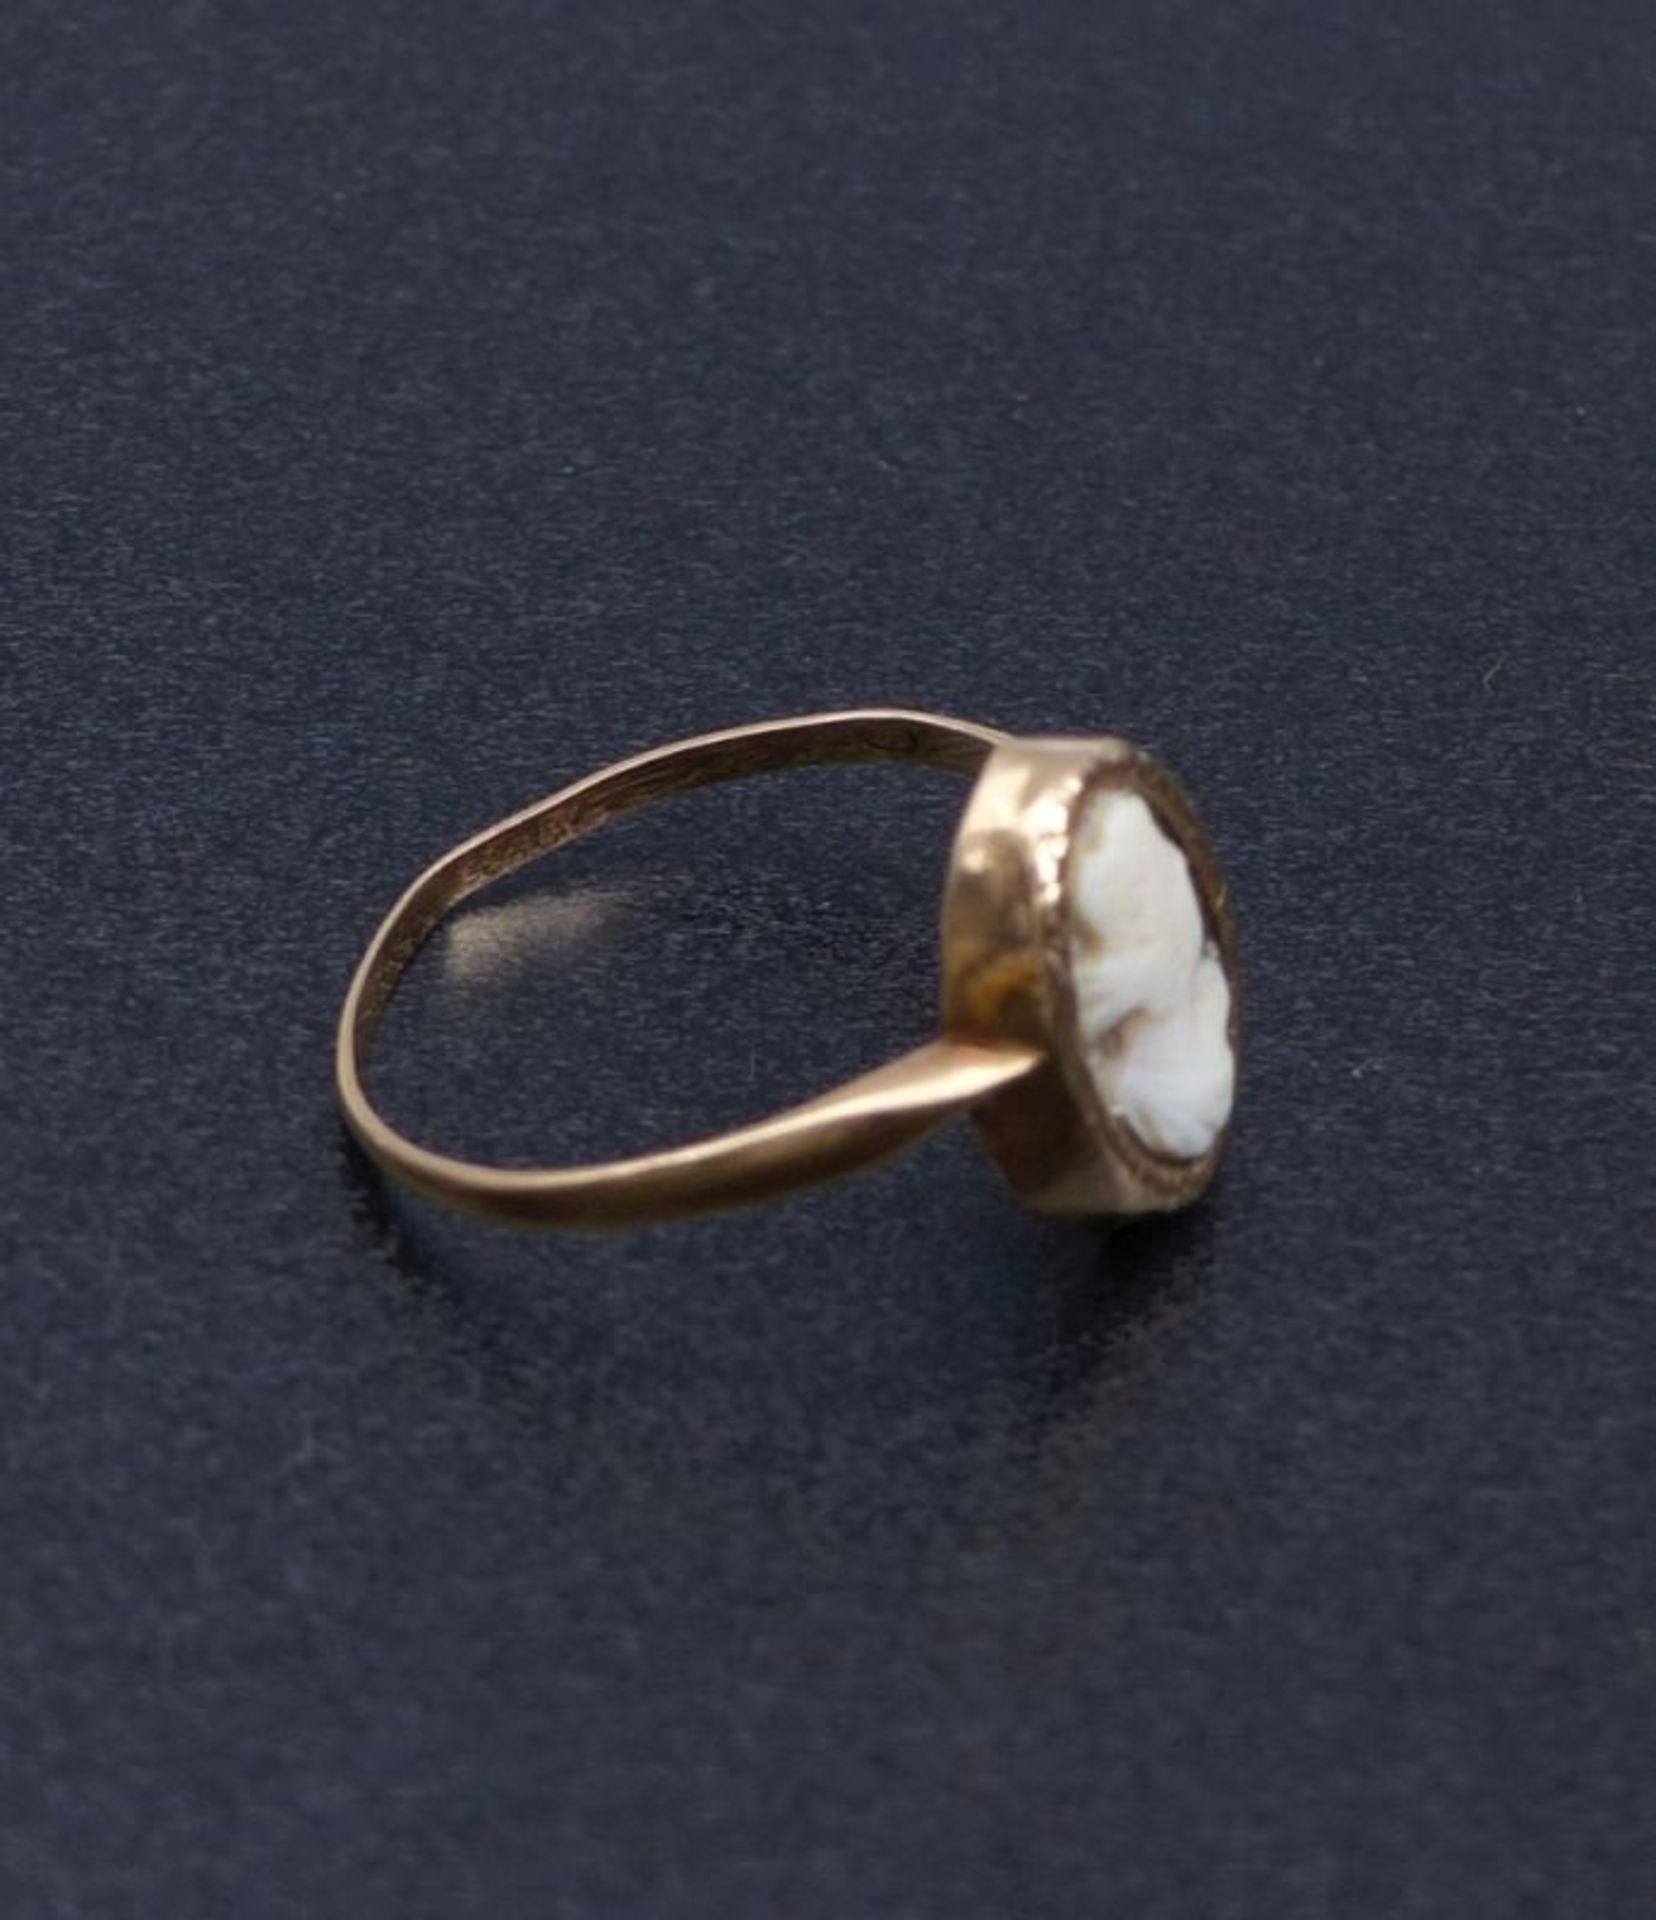 Ring with cameo - Image 2 of 3